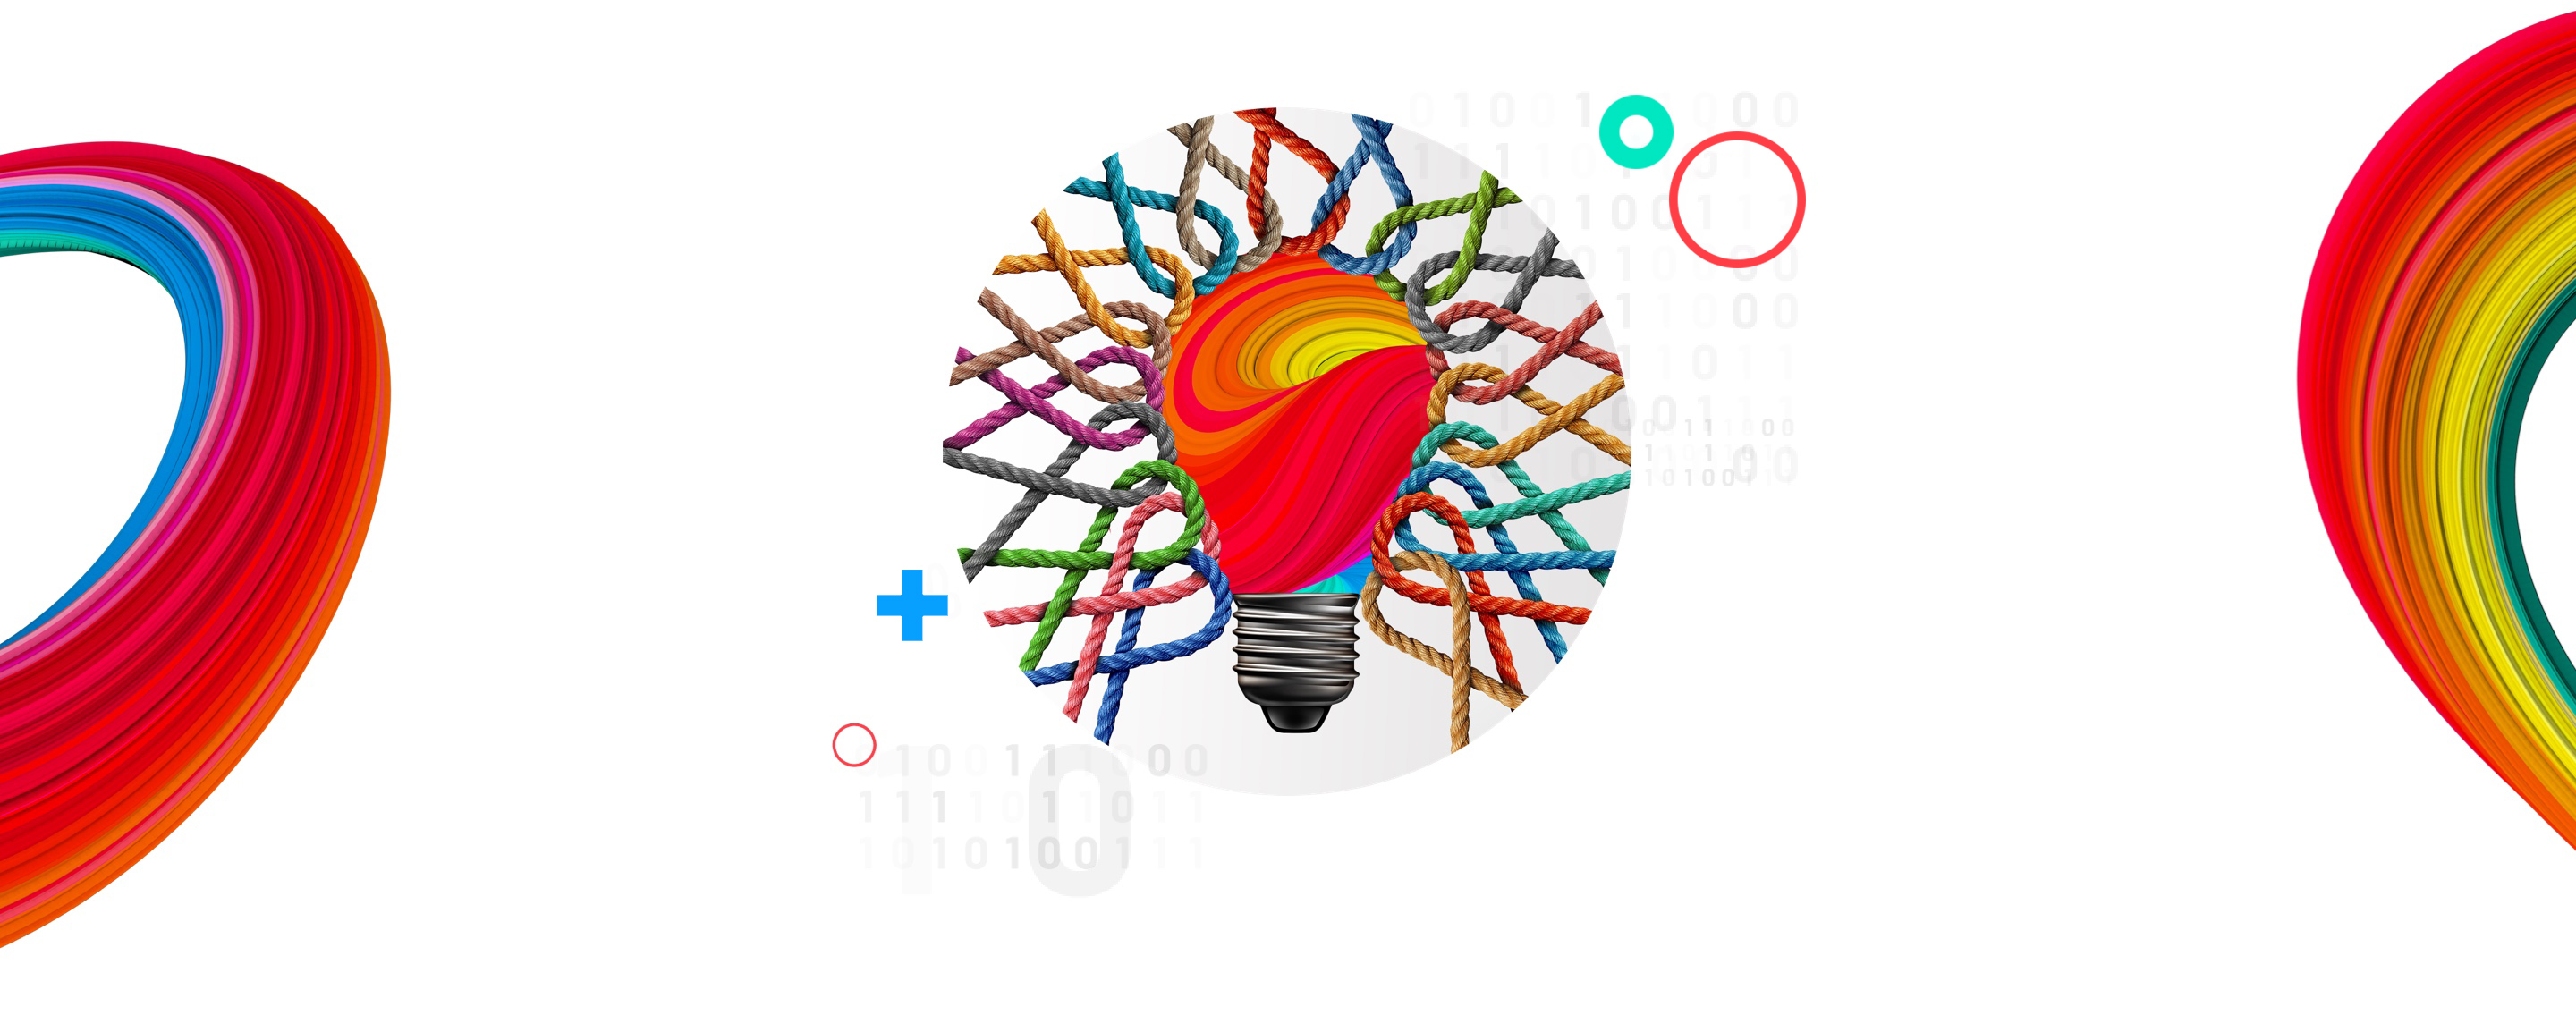 Abstract image of lighbulb representing collaboration and ideas